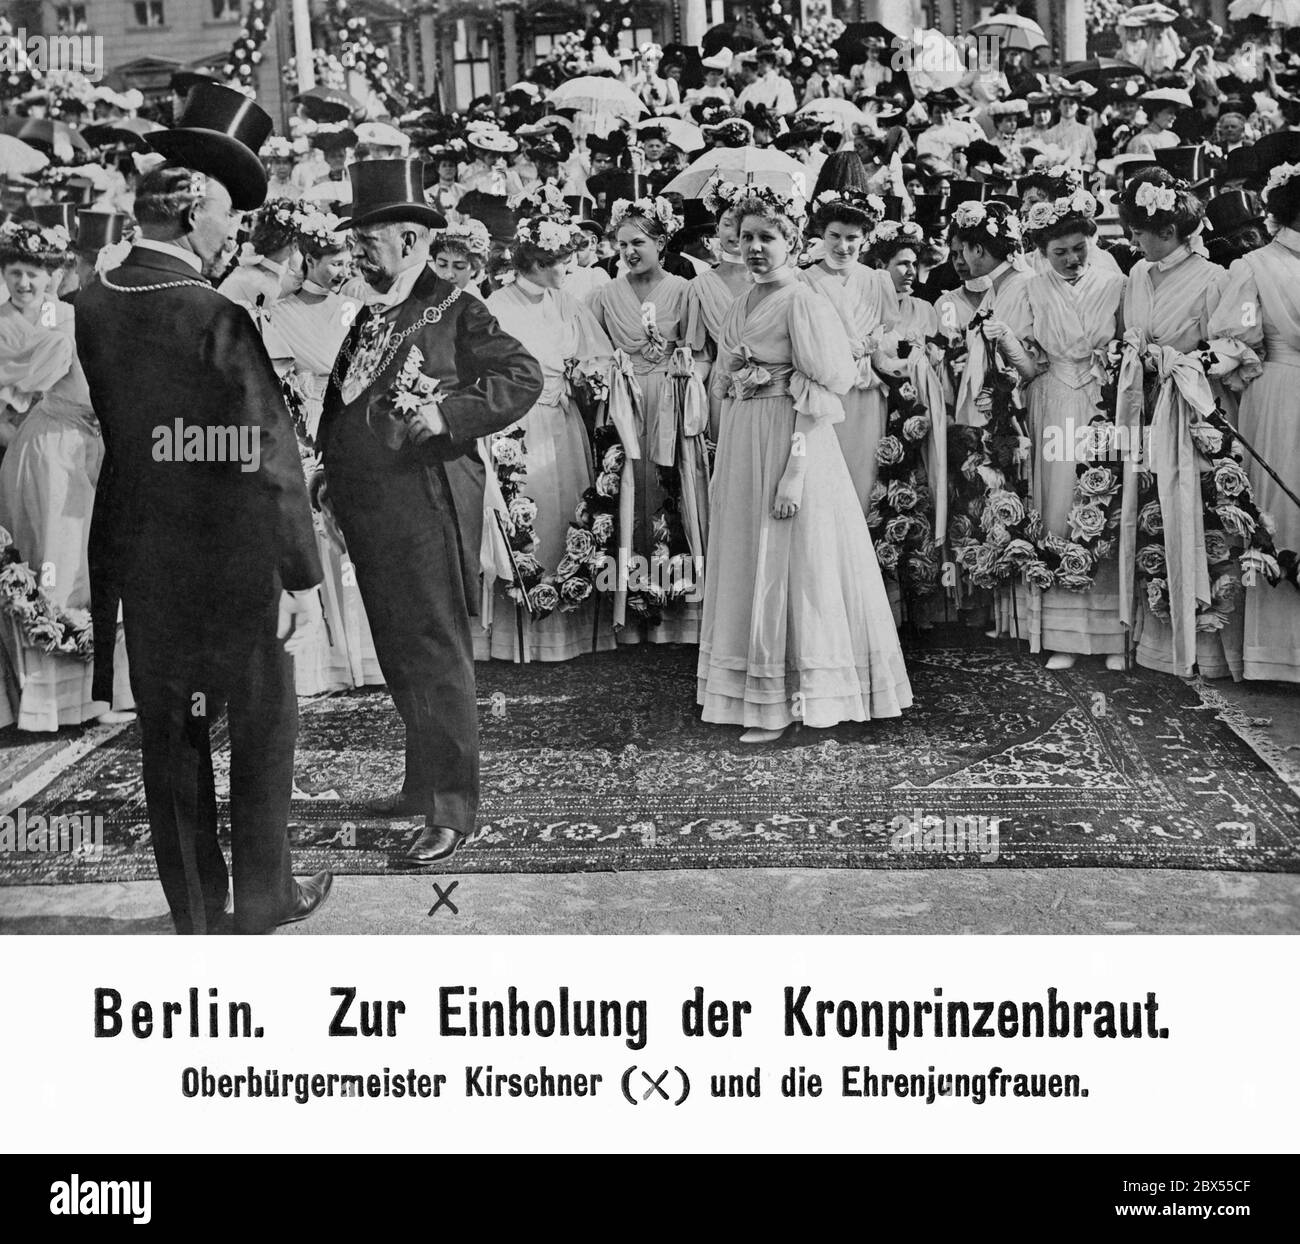 Ladies of honor were appointed in particular for the reception of male members of the numerous ruling dynasties within the empire. The photo was taken at the wedding of the Prussian Crown Prince Whelm in Berlin, when the eldest son of Kaiser Wilhelm II married Princess Cecilie. Berlin's Lord Mayor Martin Kirschner is marked with an x. Stock Photo